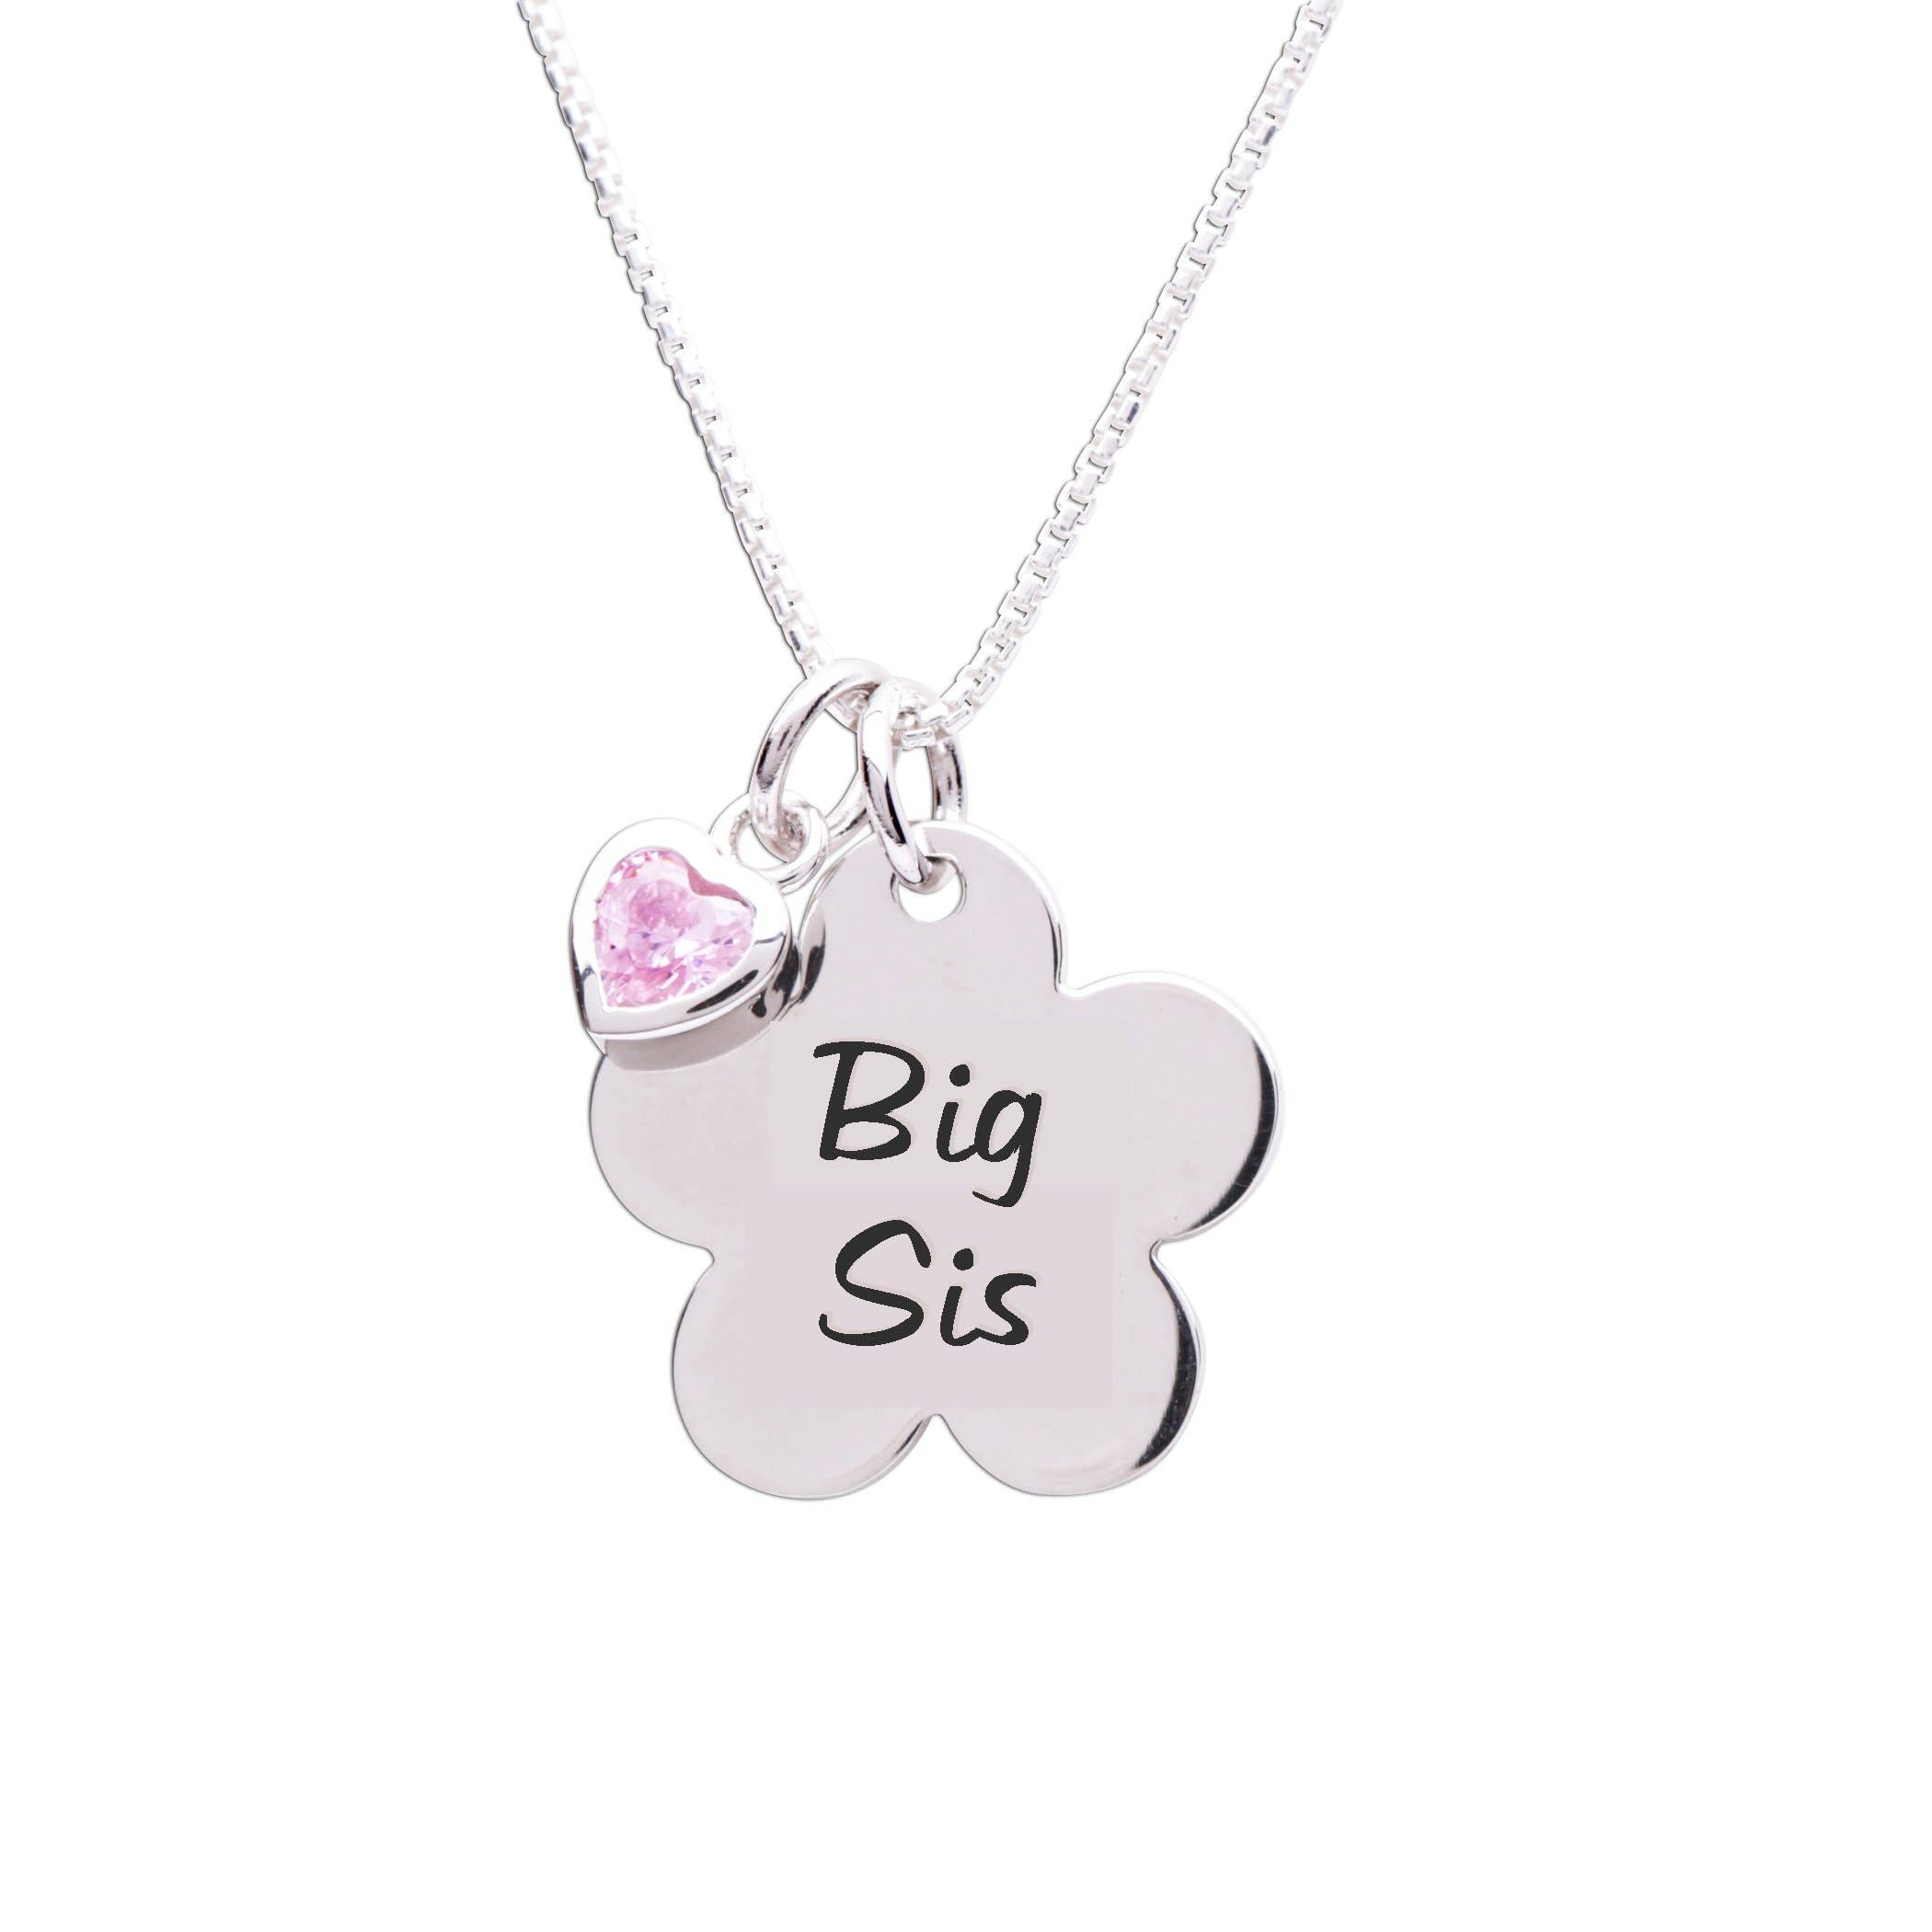 STERLING SILVER BIG SIS DAISY NECKLACE